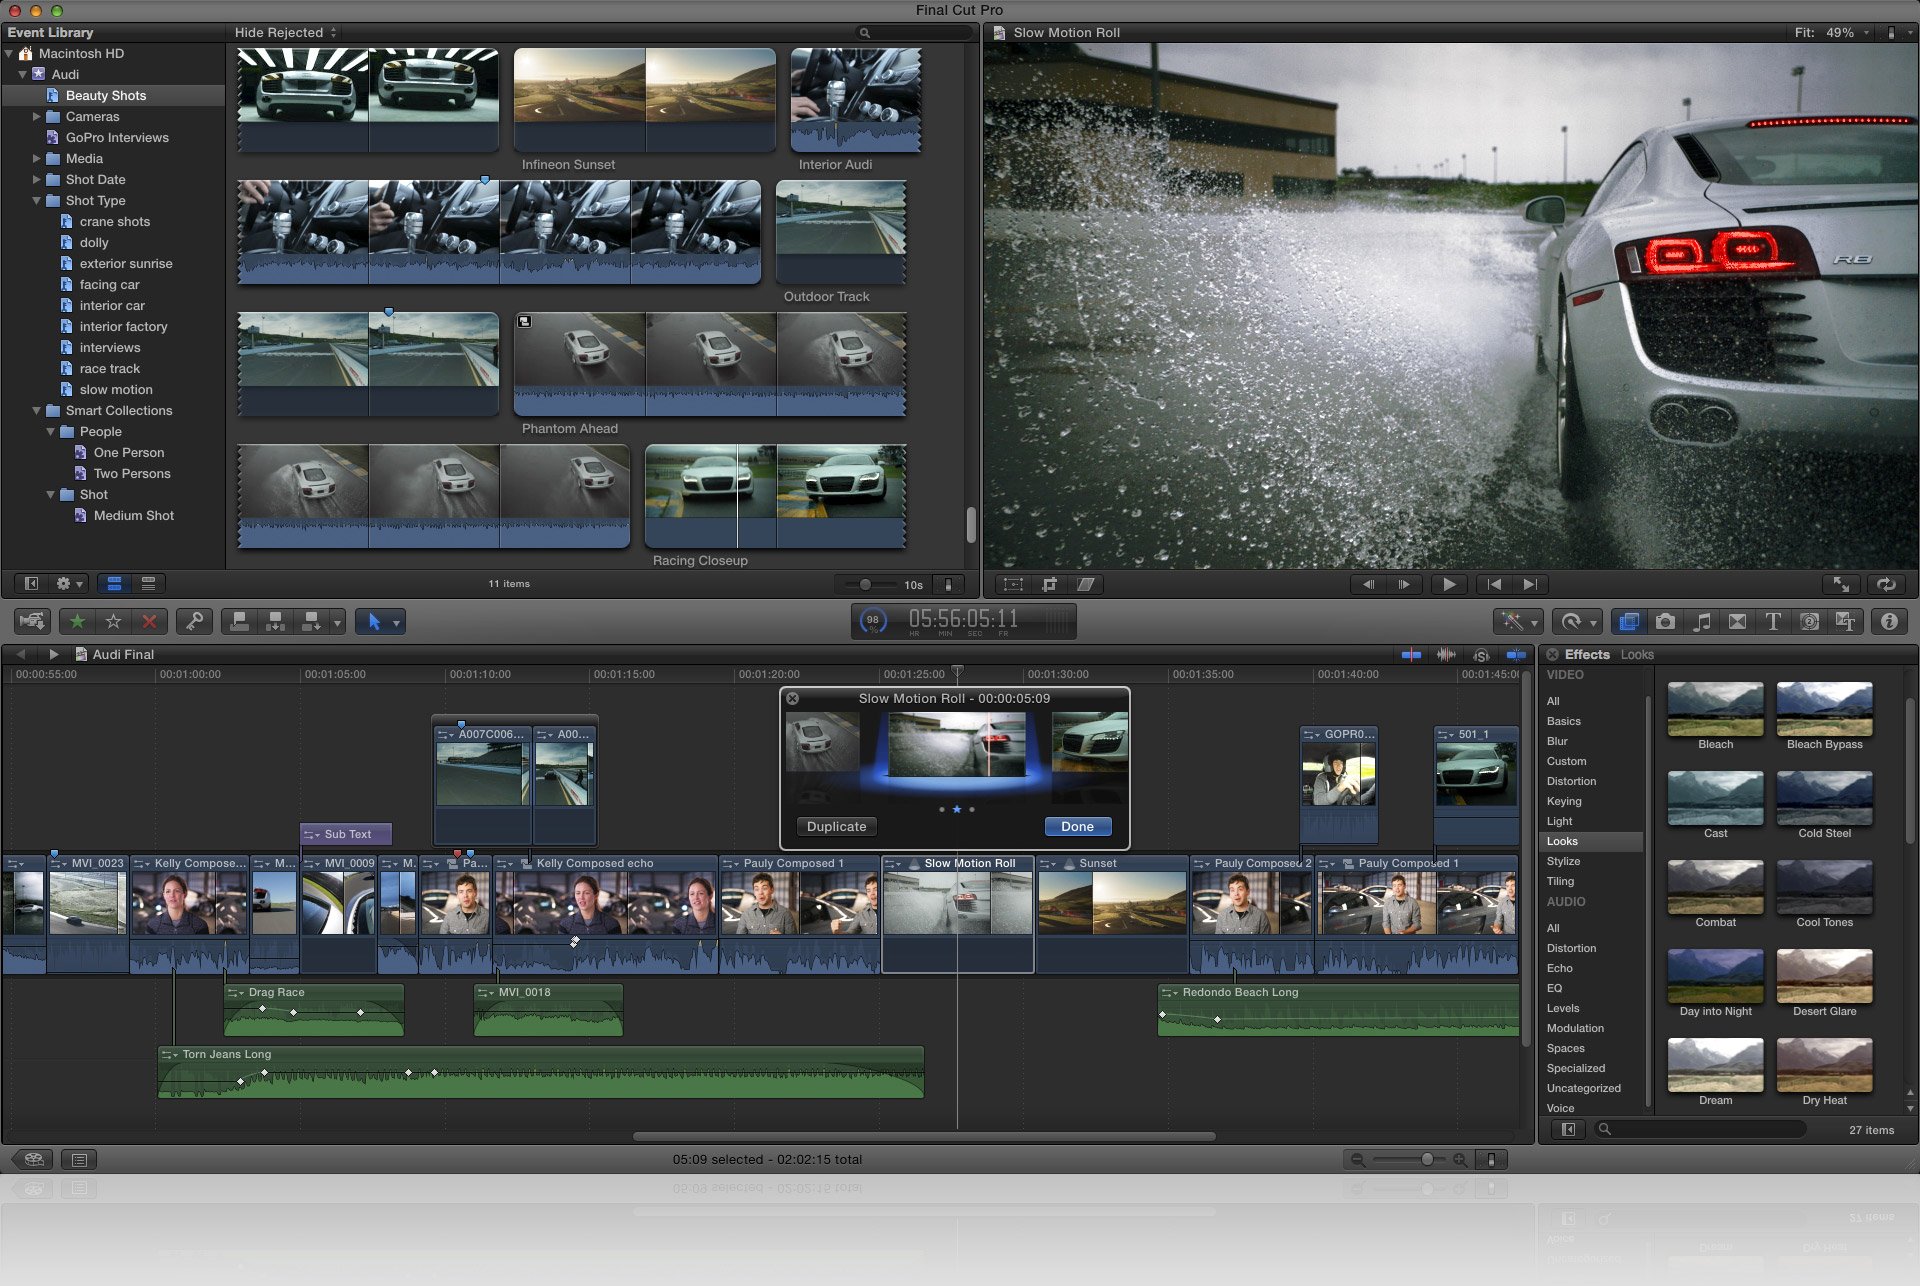 Apple updates Final Cut Pro, begins new campaign to bring